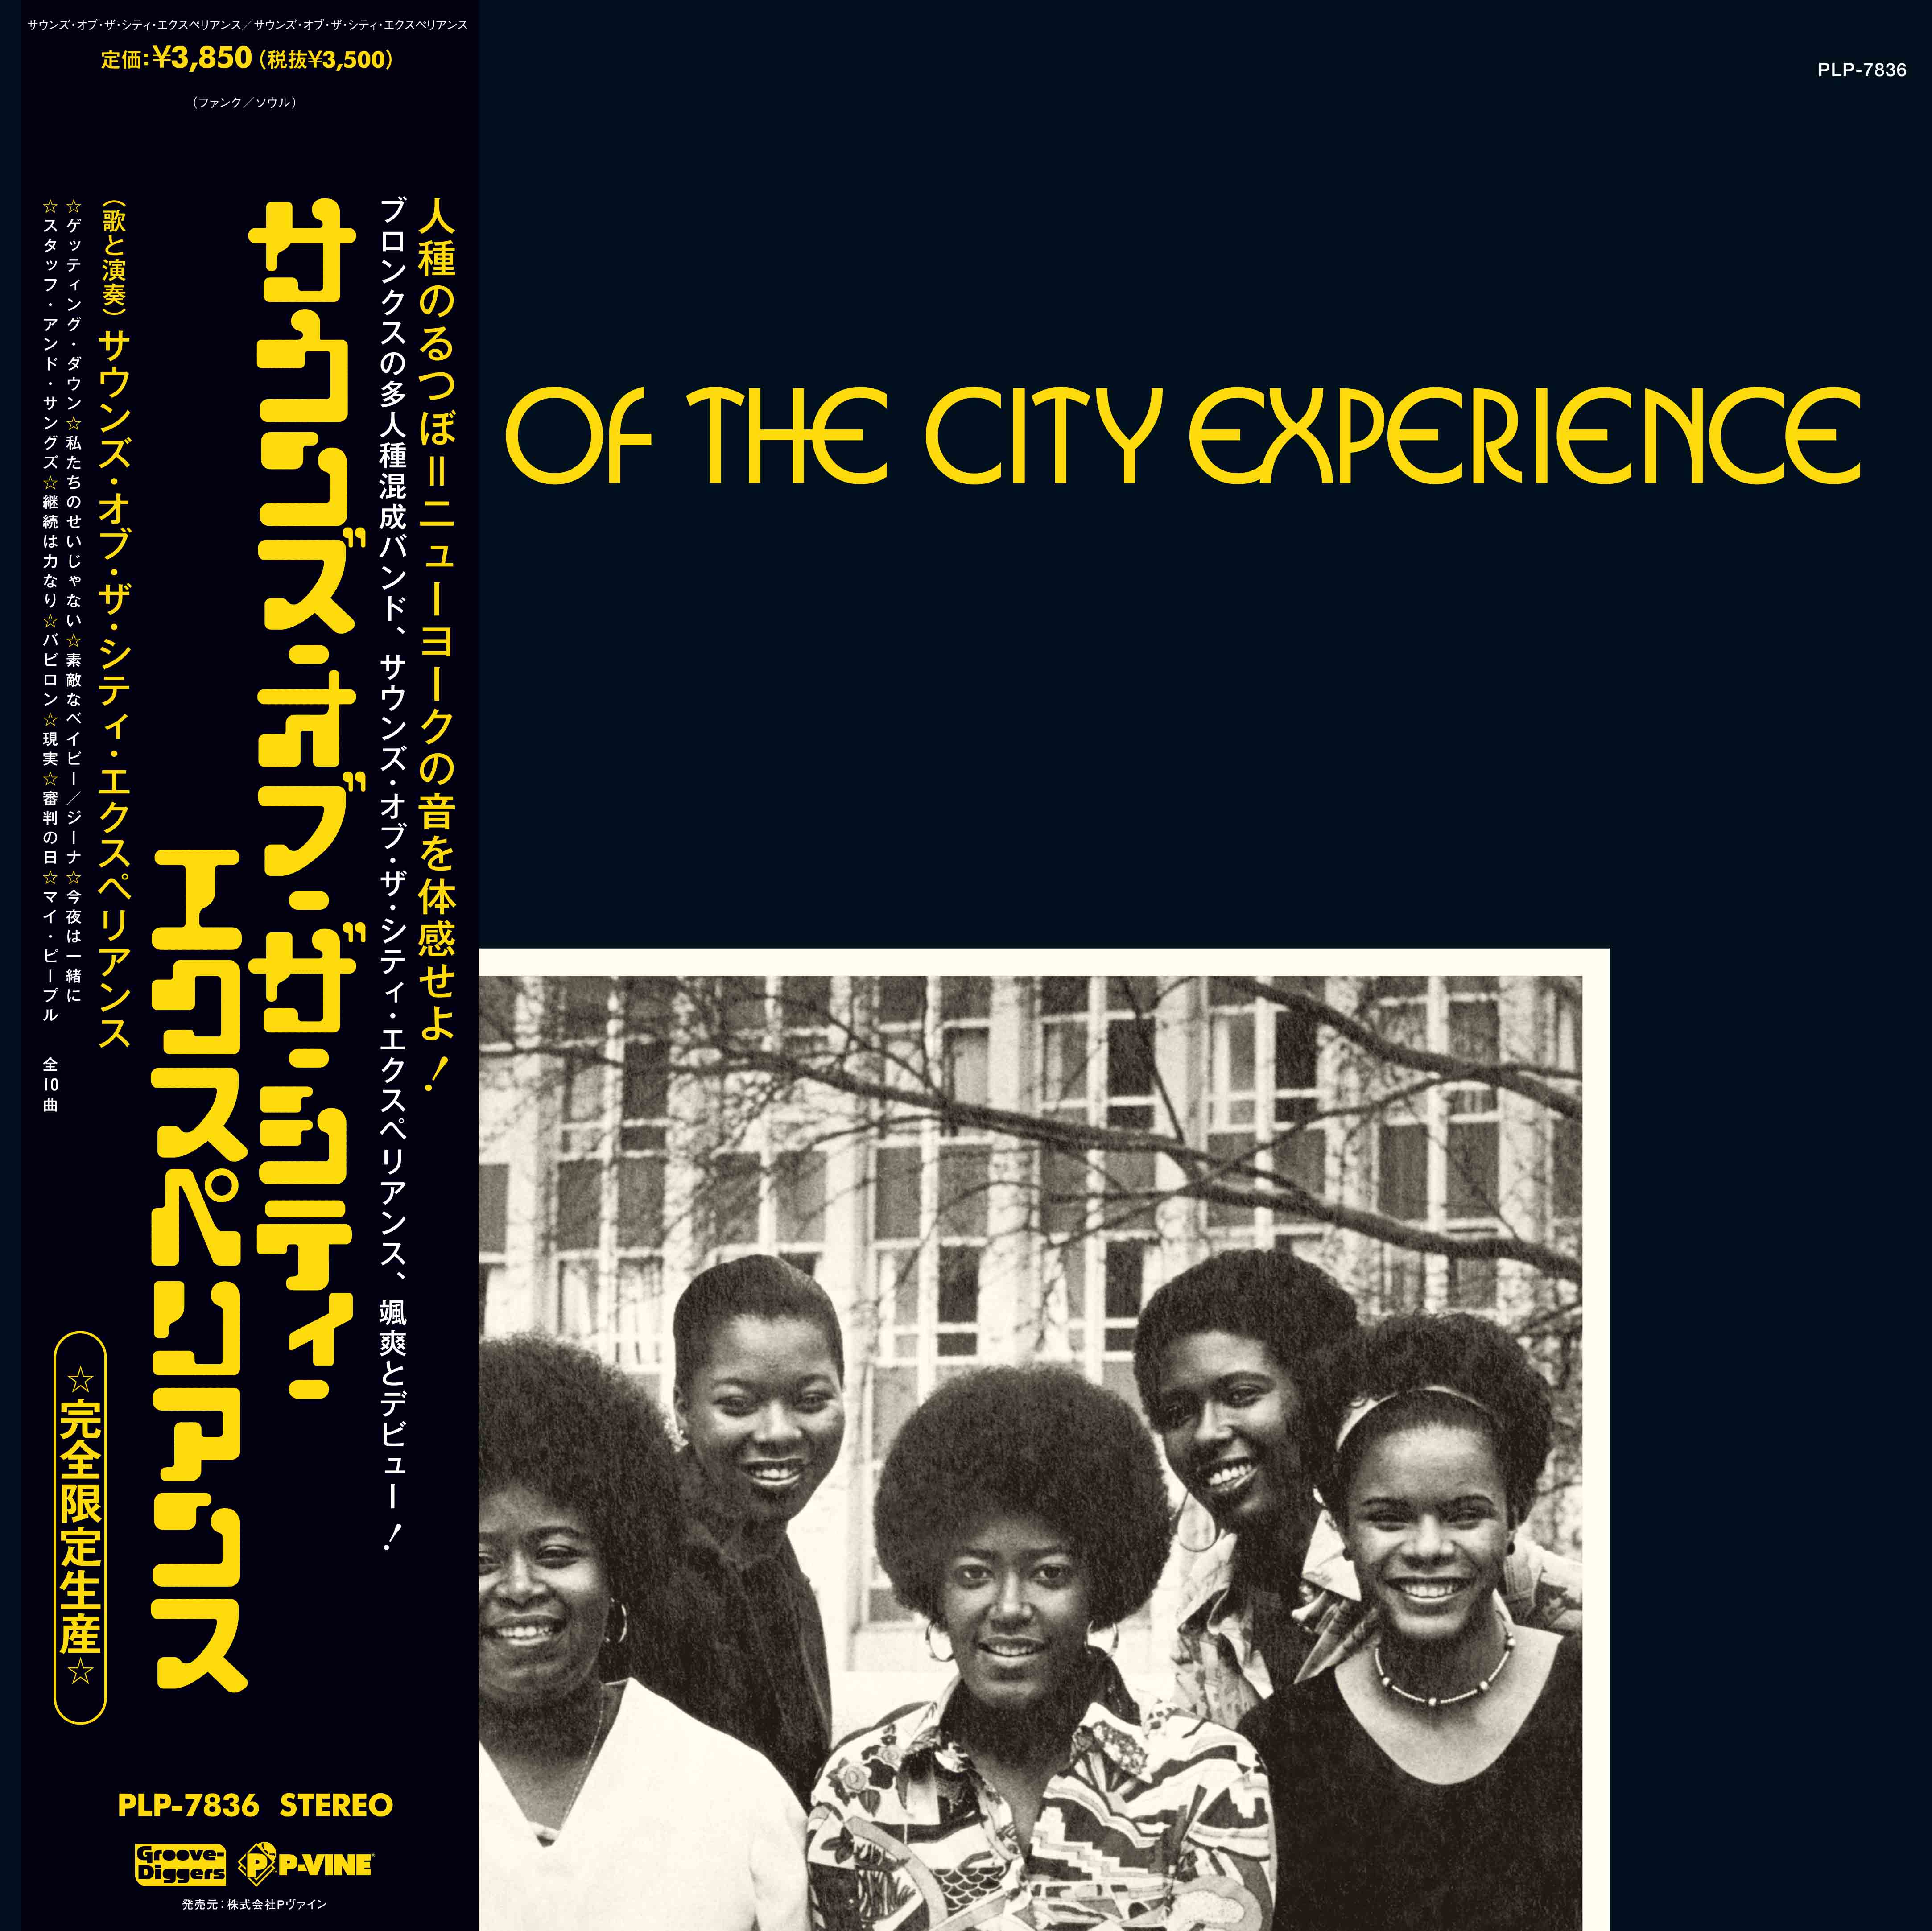 SOUNDS OF THE CITY EXPERIENCE「Sounds of the City Experience」